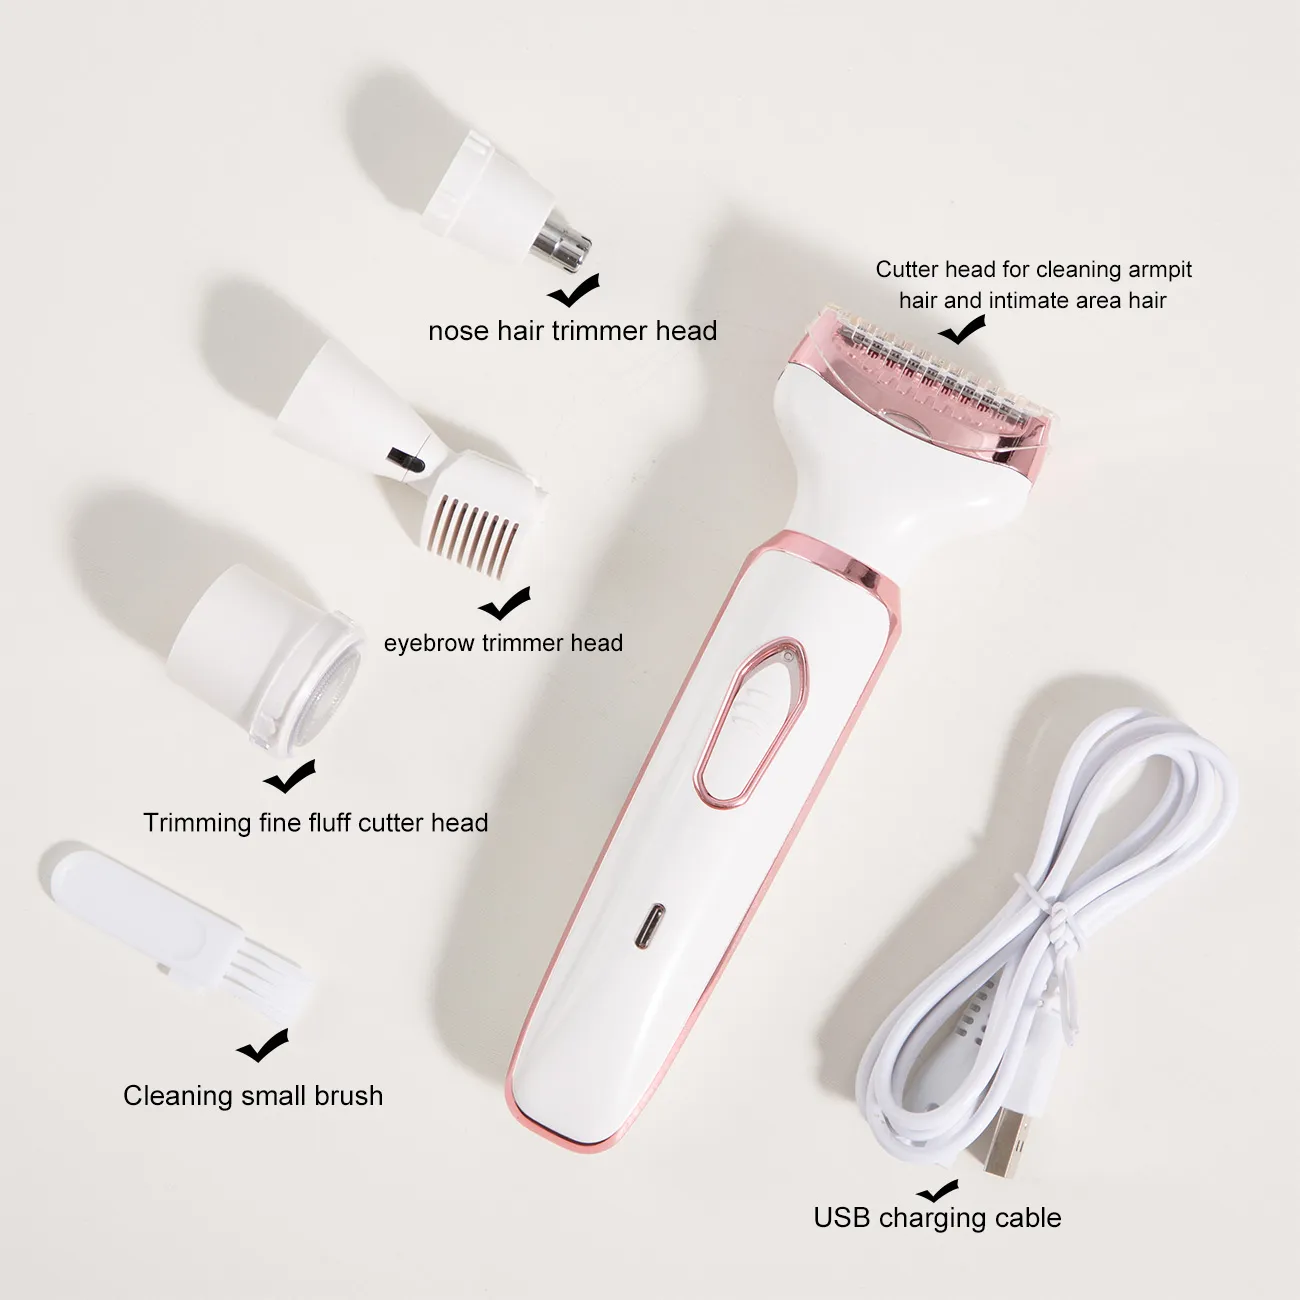 New 4-in-1 Women's Shaver With USB Charging